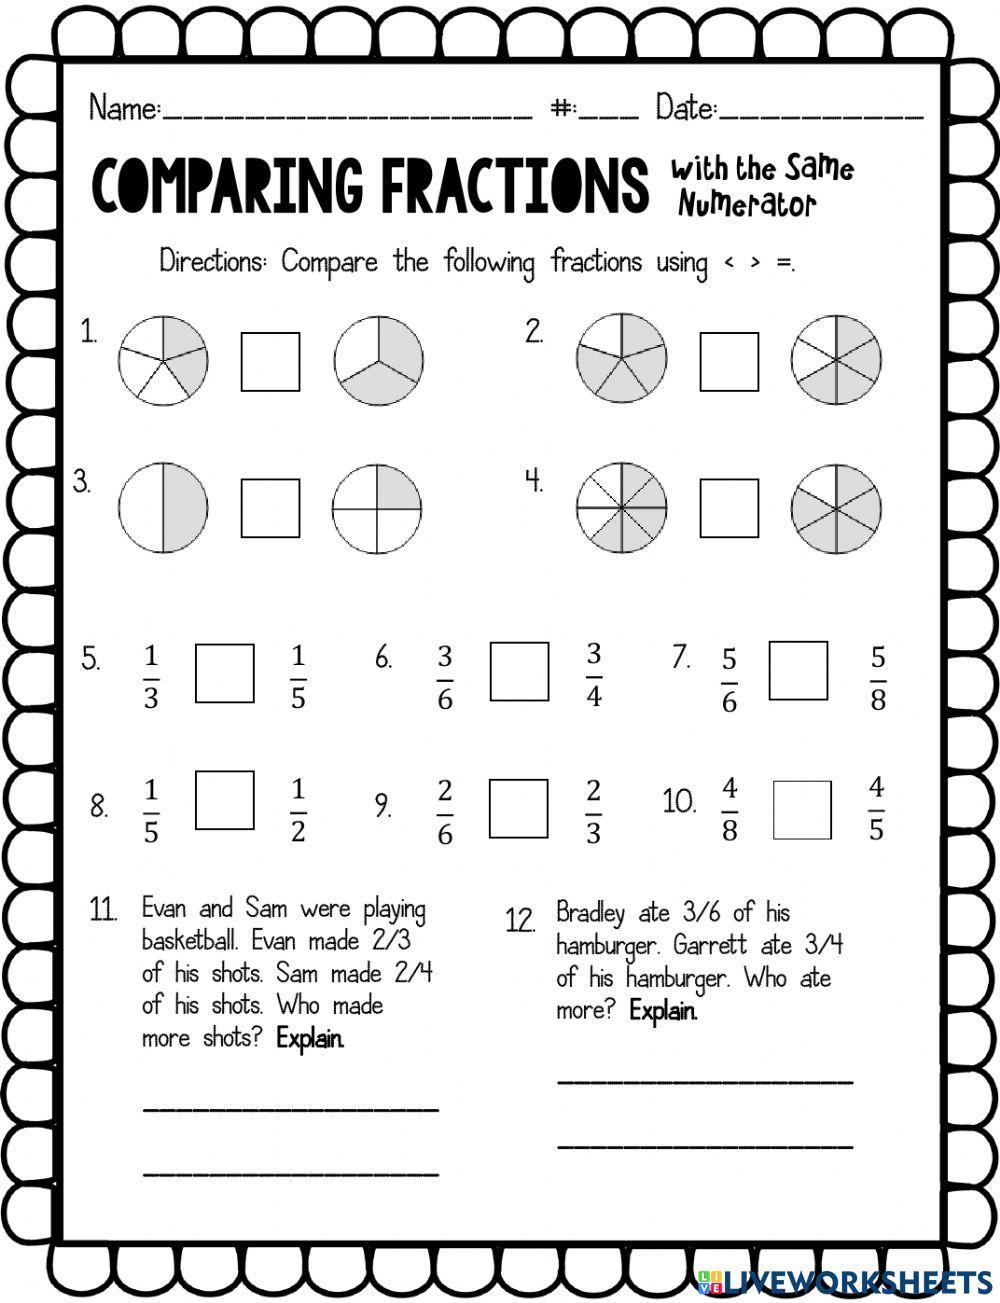 Comparing fractions with same numerator